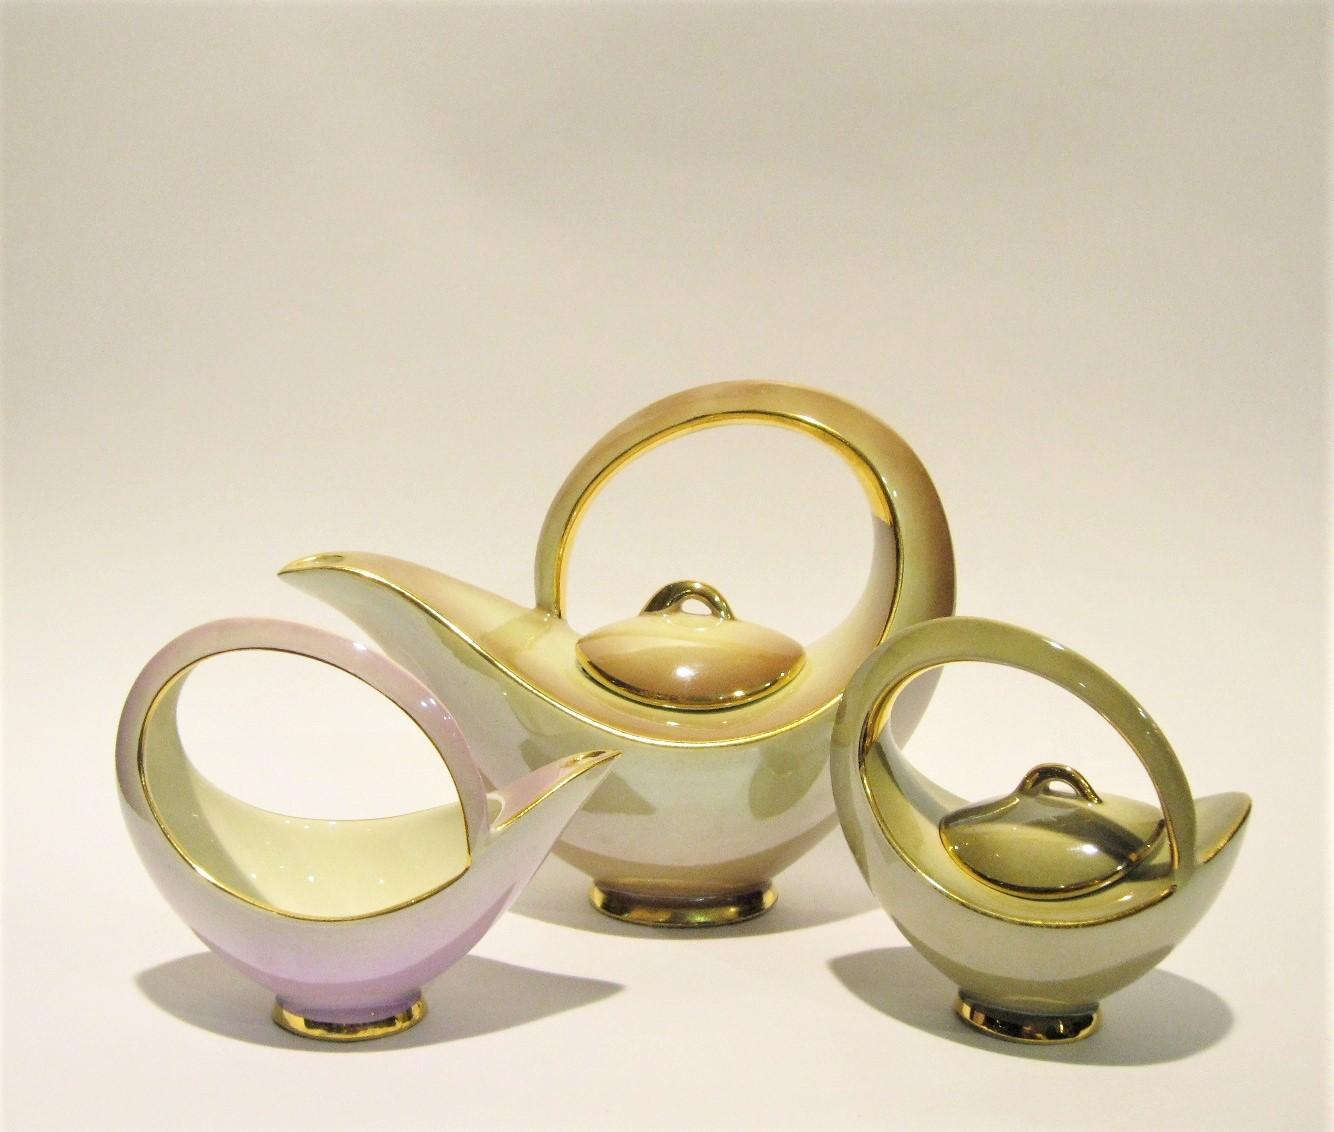 Tea Set by Italo Casini, Sesto Fiorentino, Italy, circa 1950s

Offered for sale is a Mid-Century Modern tea set by Italo Casini, Sesto Fiorentino, Italy. Comprised of 6 cups and saucers, 1 teapot with cover, 1 sugar bowl with lid, 1 milk jug, for a